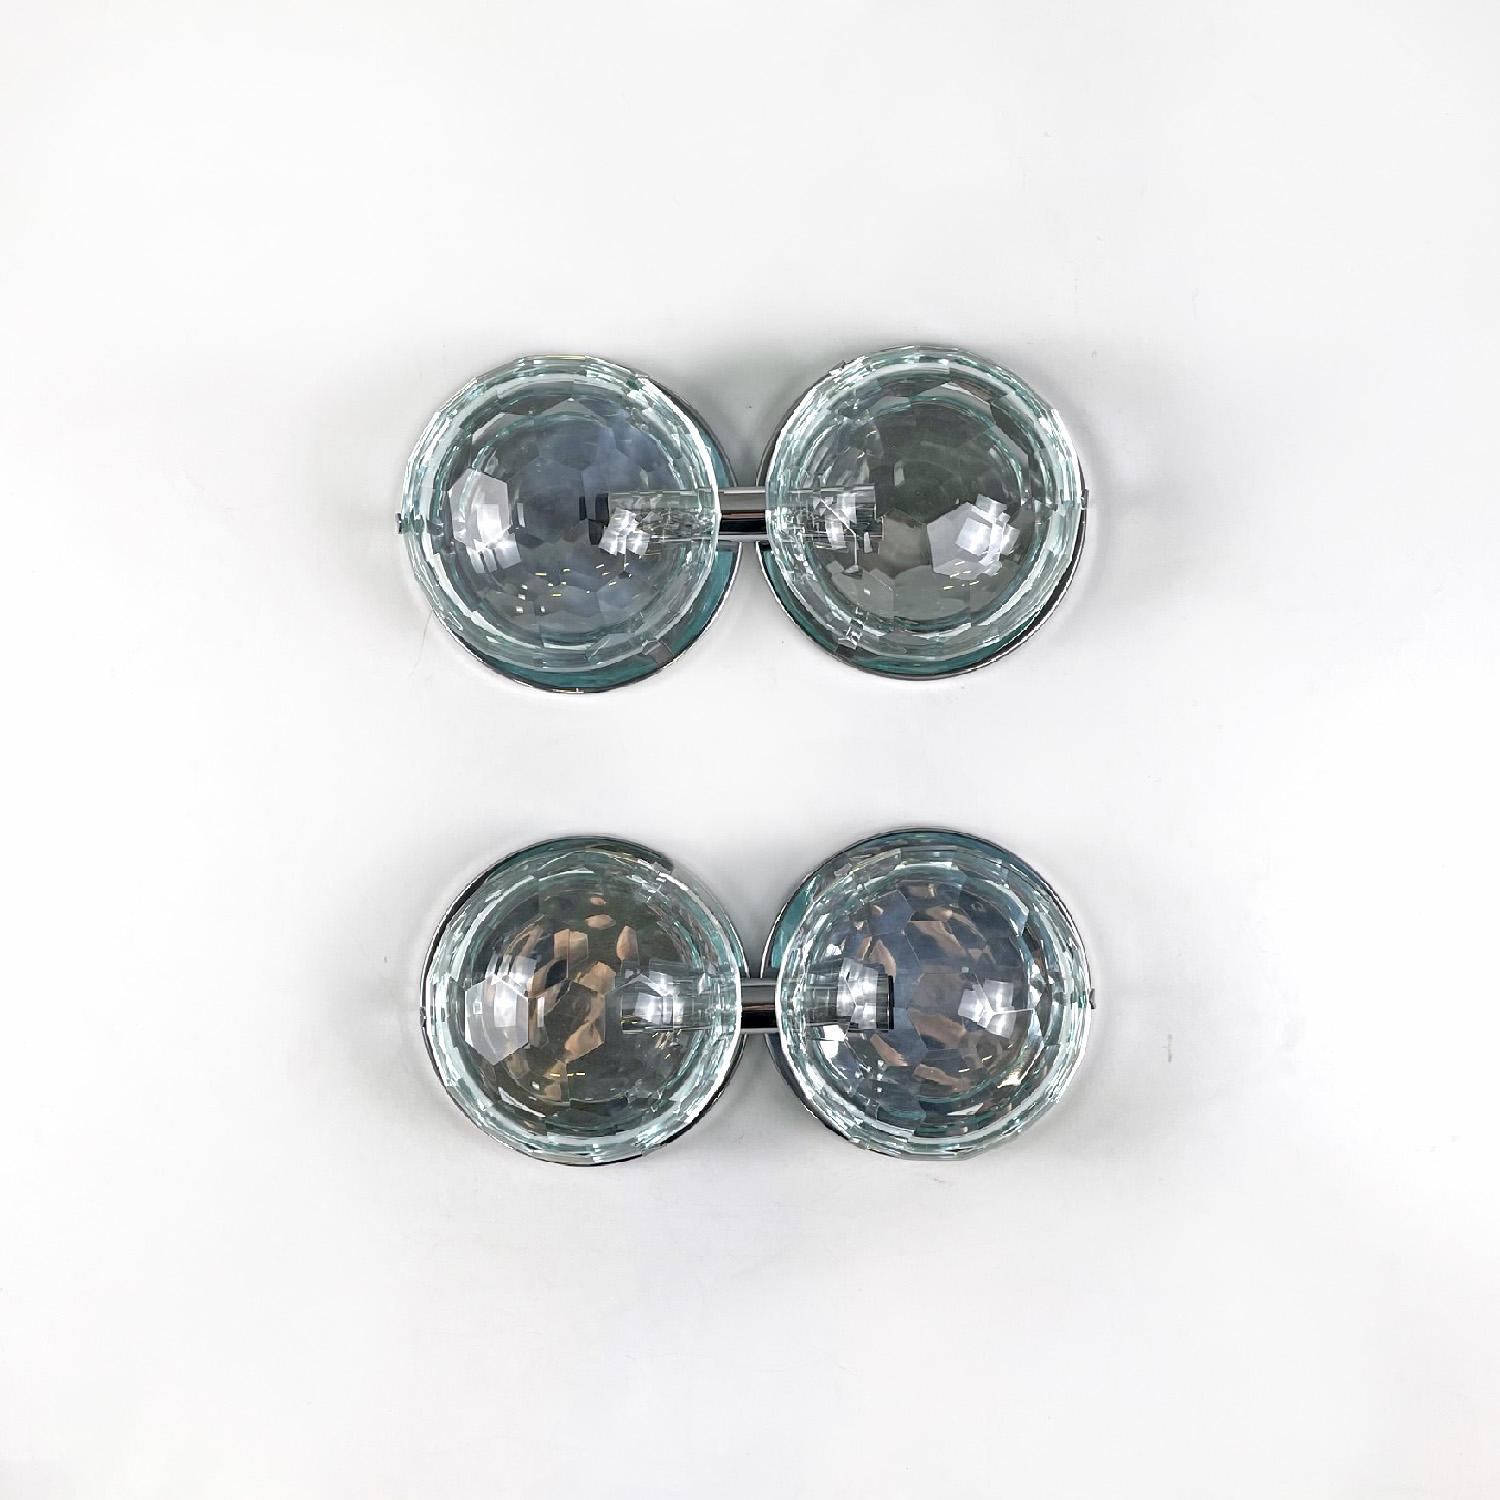 Italian mid-century modern chromed metal and faceted glass wall light, 1960s
Pair of round wall lights. They are composed of two circular bases joined by a cylinder to which two lamp holders correspond at the two ends, all in chromed metal. The